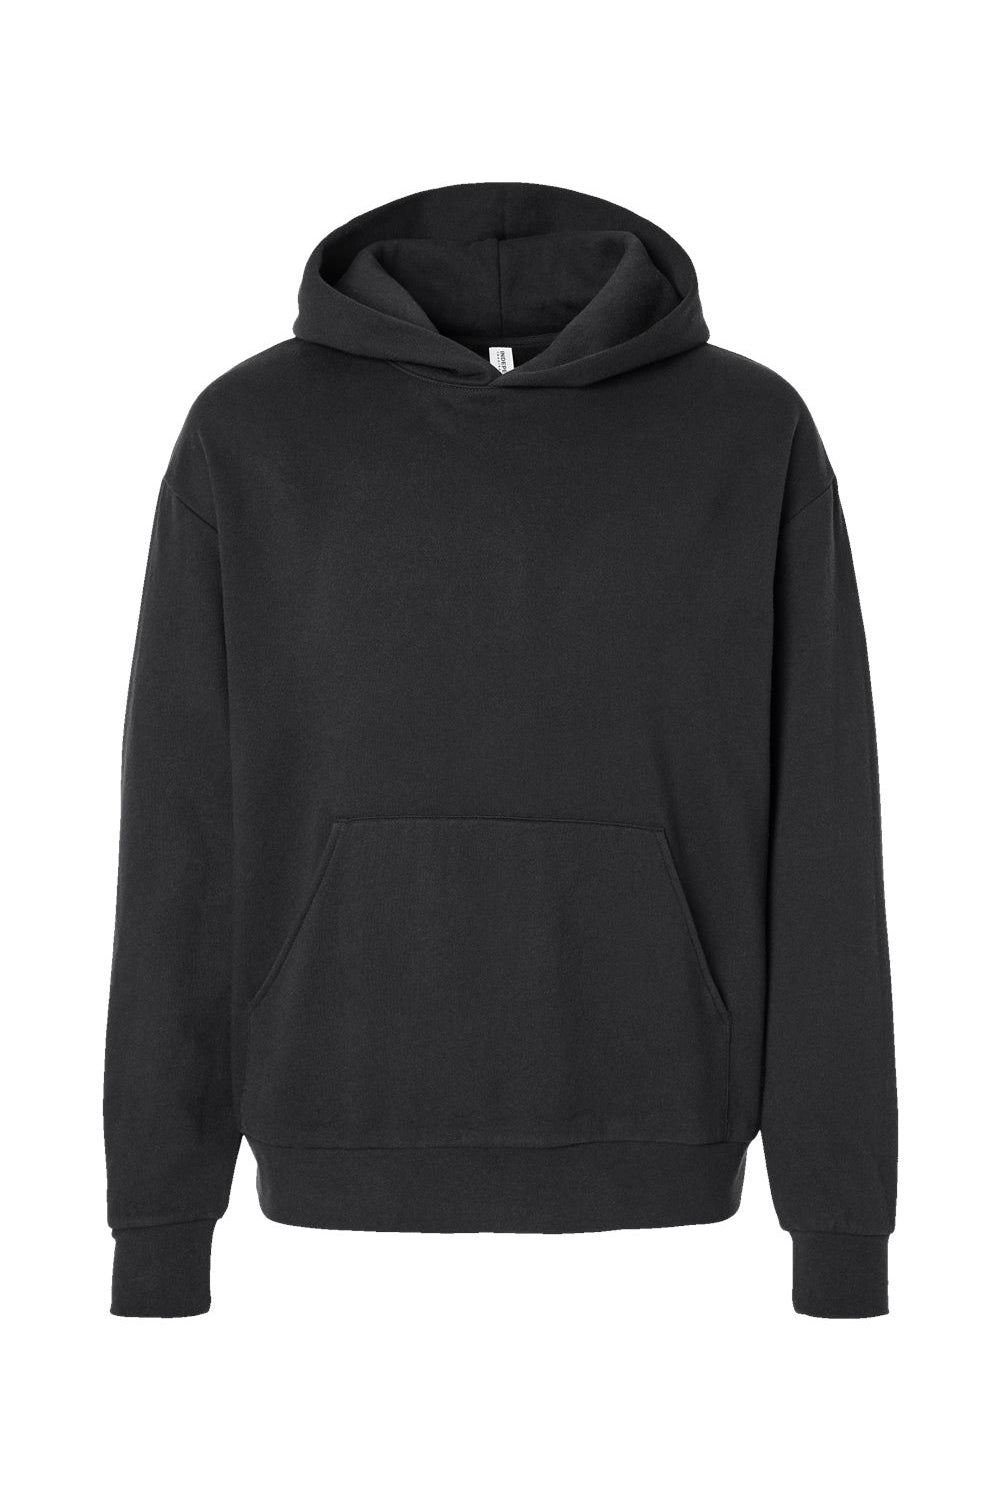 Independent Trading Co. IND280SL Mens Avenue Hooded Sweatshirt Hoodie Black Flat Front